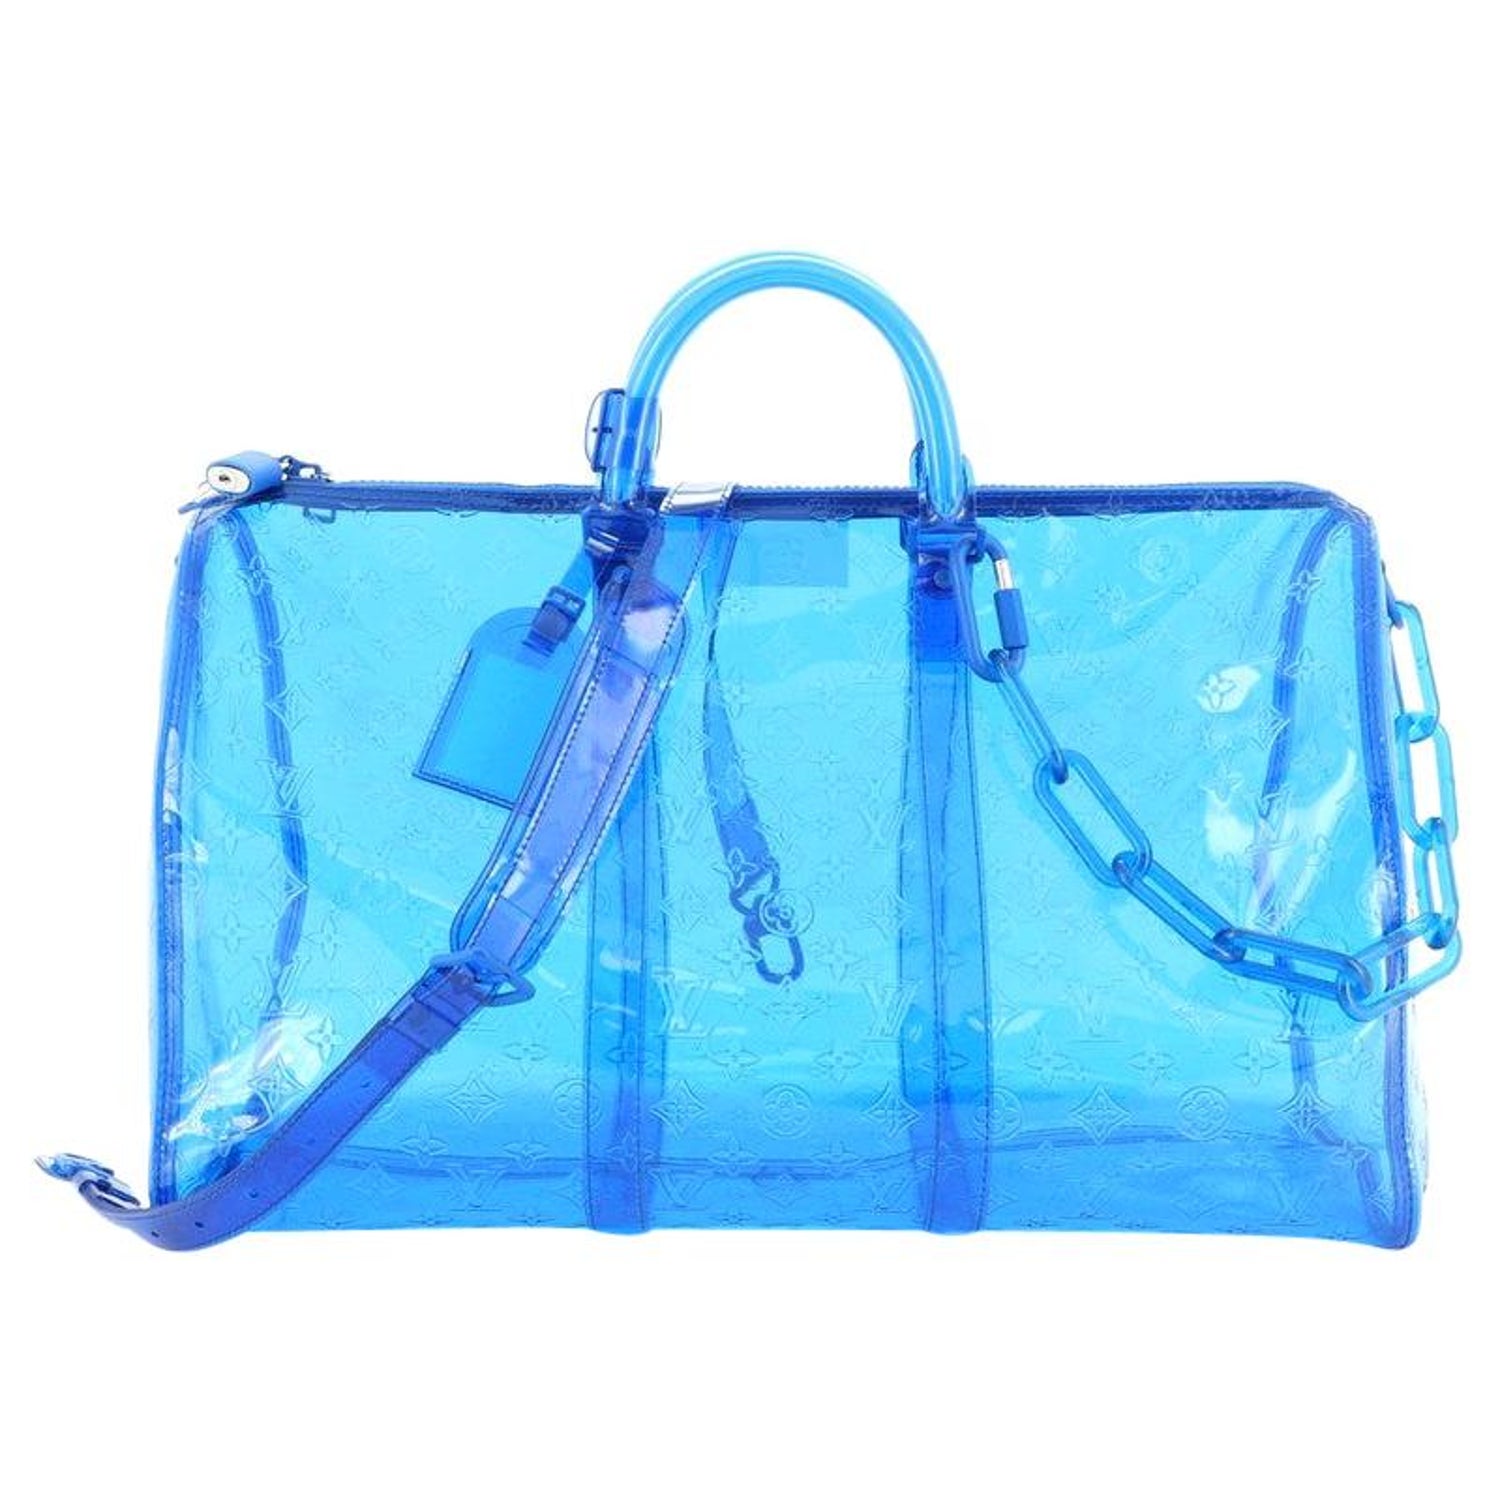 Louis Vuitton Clear Blue Bag - For Sale on 1stDibs